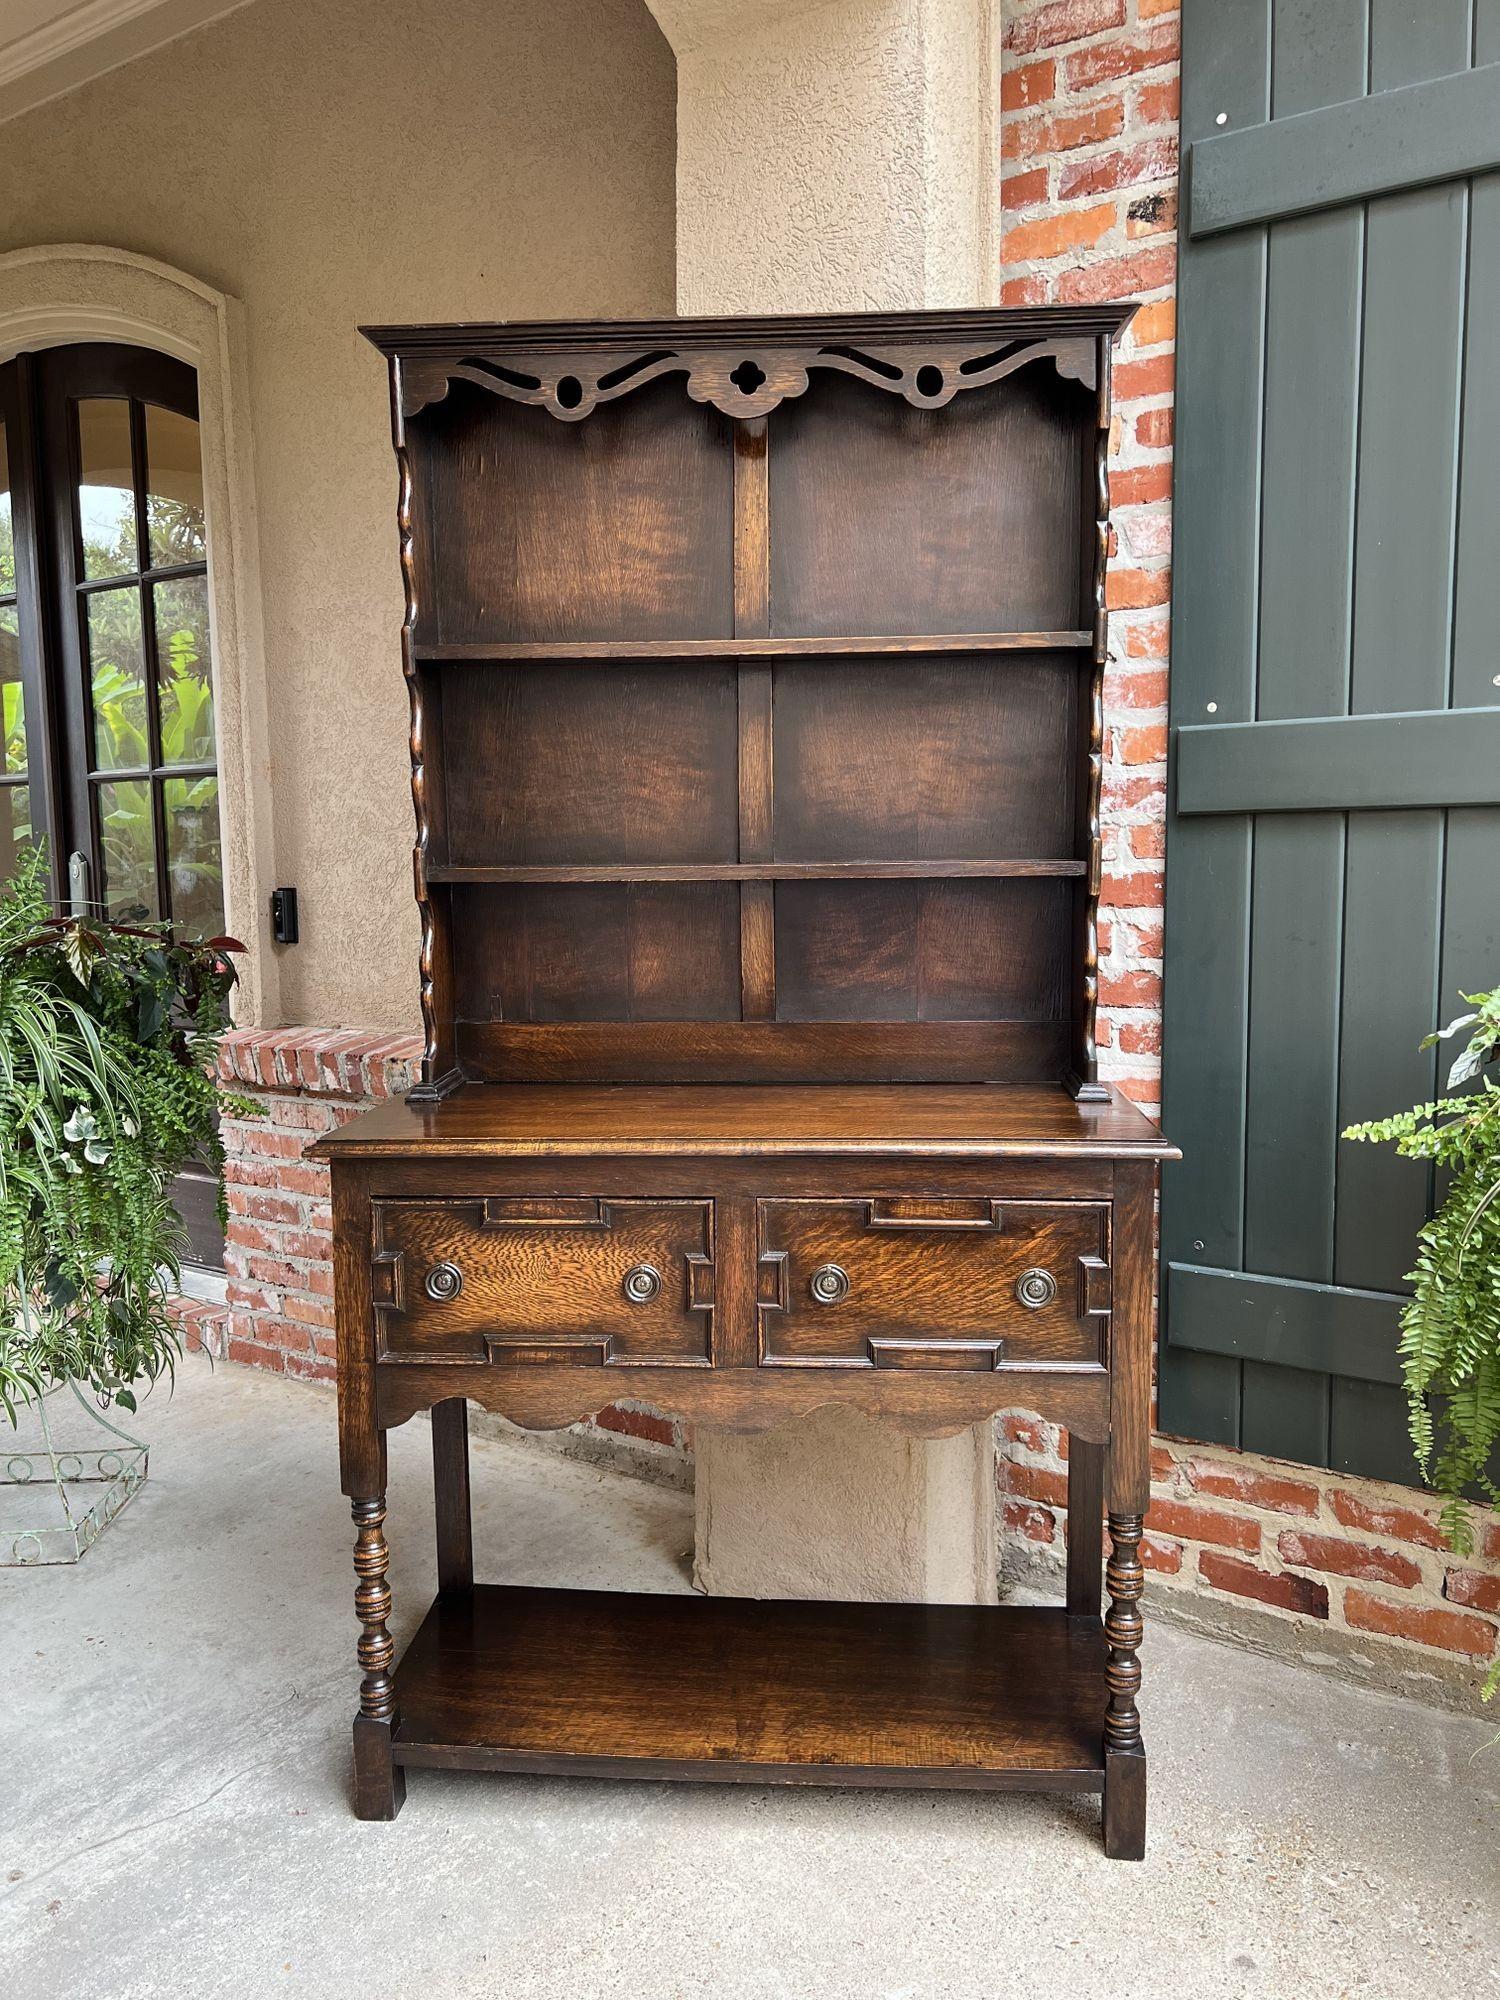 Antique English Oak Welsh dresser petite sideboard Hutch Jacobean Farmhouse.
 
Direct from England, (YES, our English container finally arrived, and we have some amazing English antiques, and of course, lots of barley twist)!
 
Here we have a